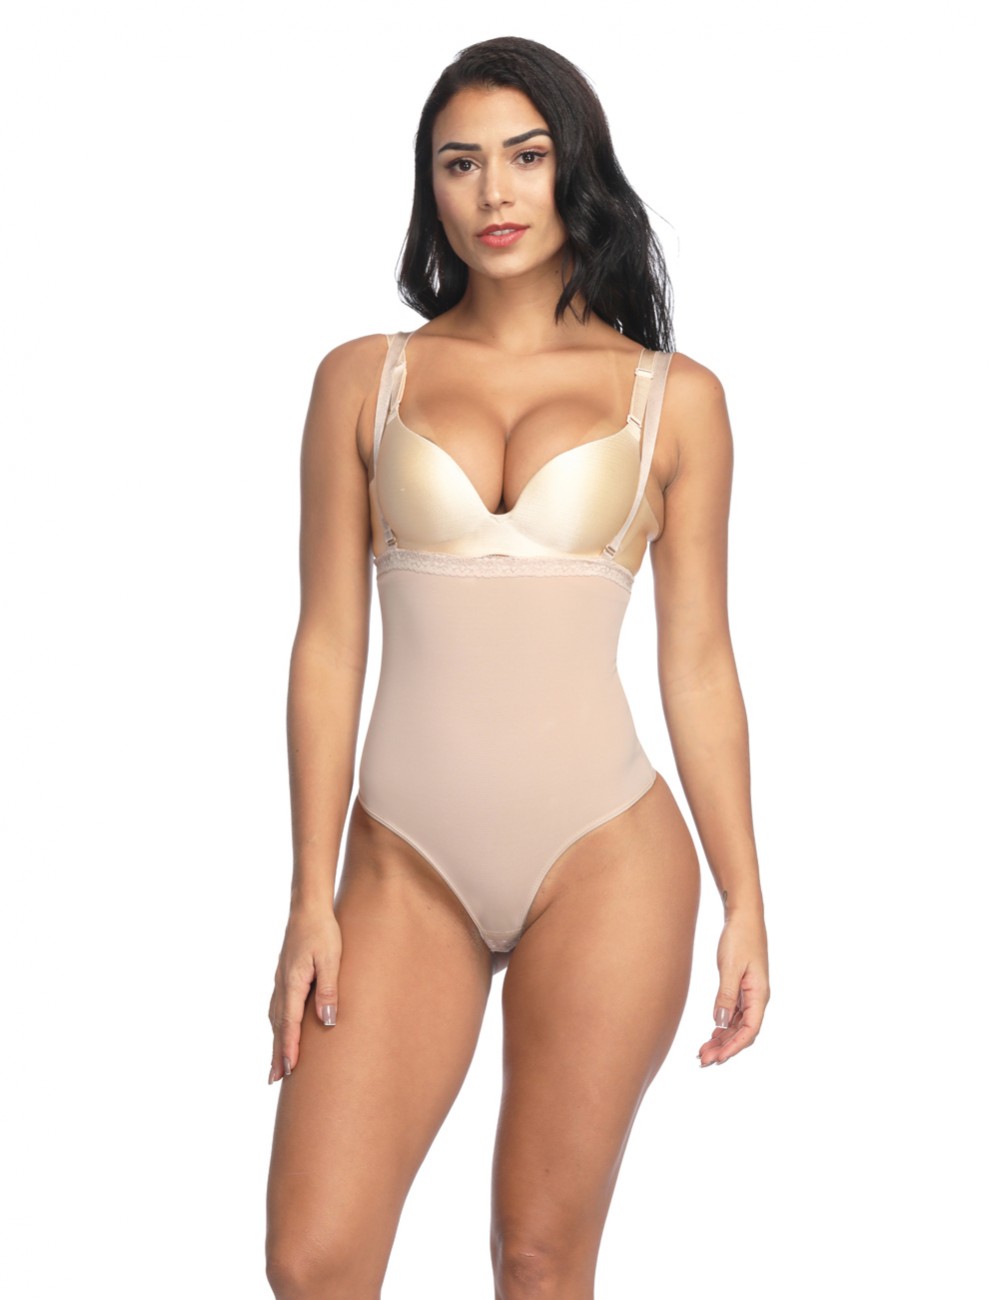 Flat Out Nude Adjustable Straps Full Versatile Body Shapers Underbust